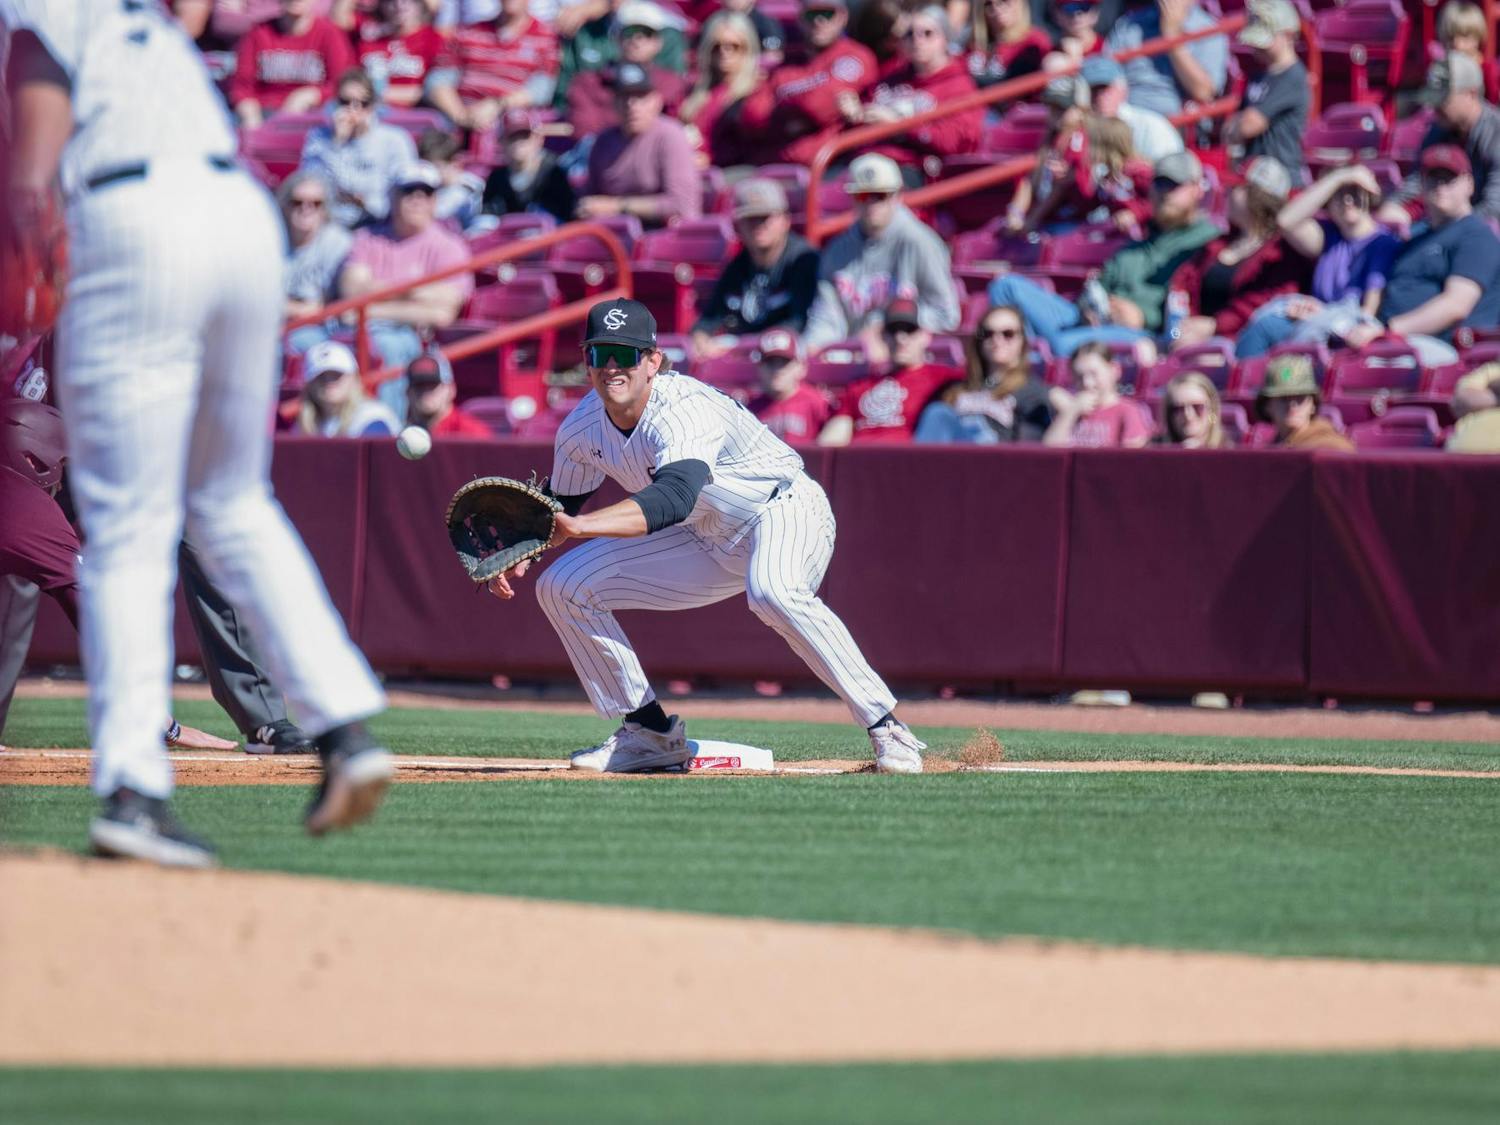 Senior infielder Tyler Causey attempts to catch a runner at first base during South Carolina's game against Texas A&amp;M on April 6, 2024. The Gamecocks lost 6-3 to the Aggies in the matchup.